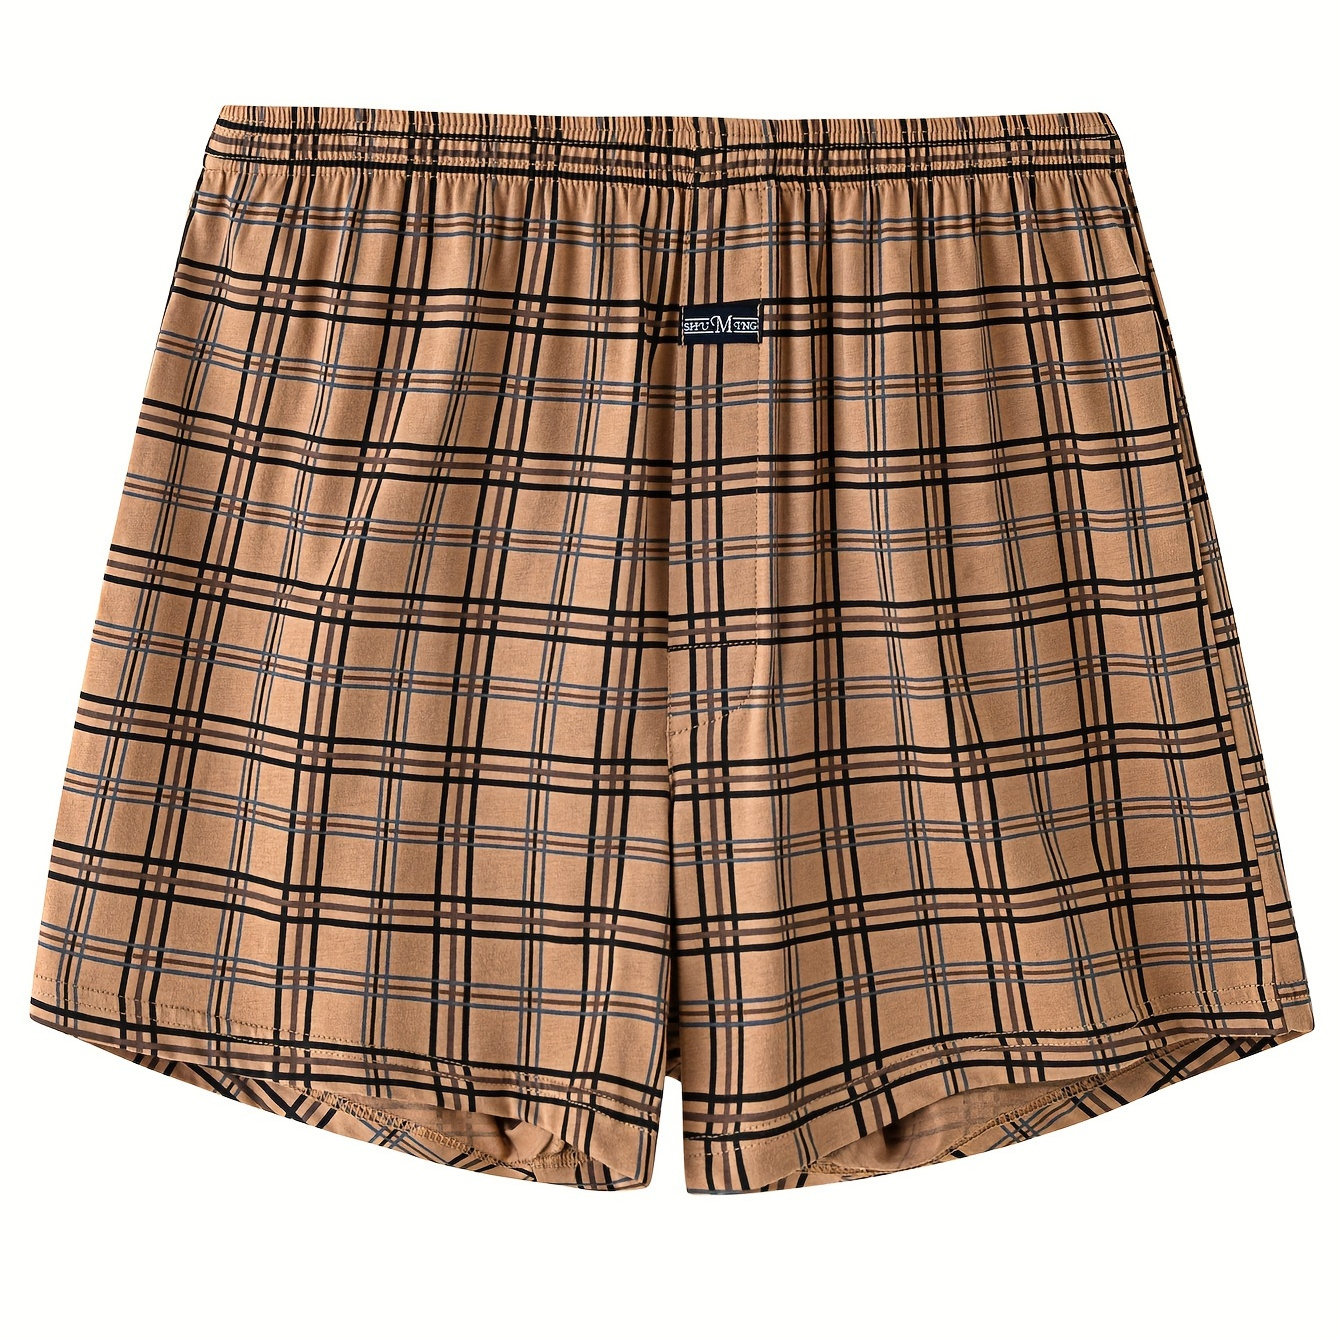 

Middle-aged And Elderly Men's Large Size Trendy Plaid Comfy Cotton Boxer Shorts, Casual Shorts Arrow Pants Elastic Loose-fit Shorts